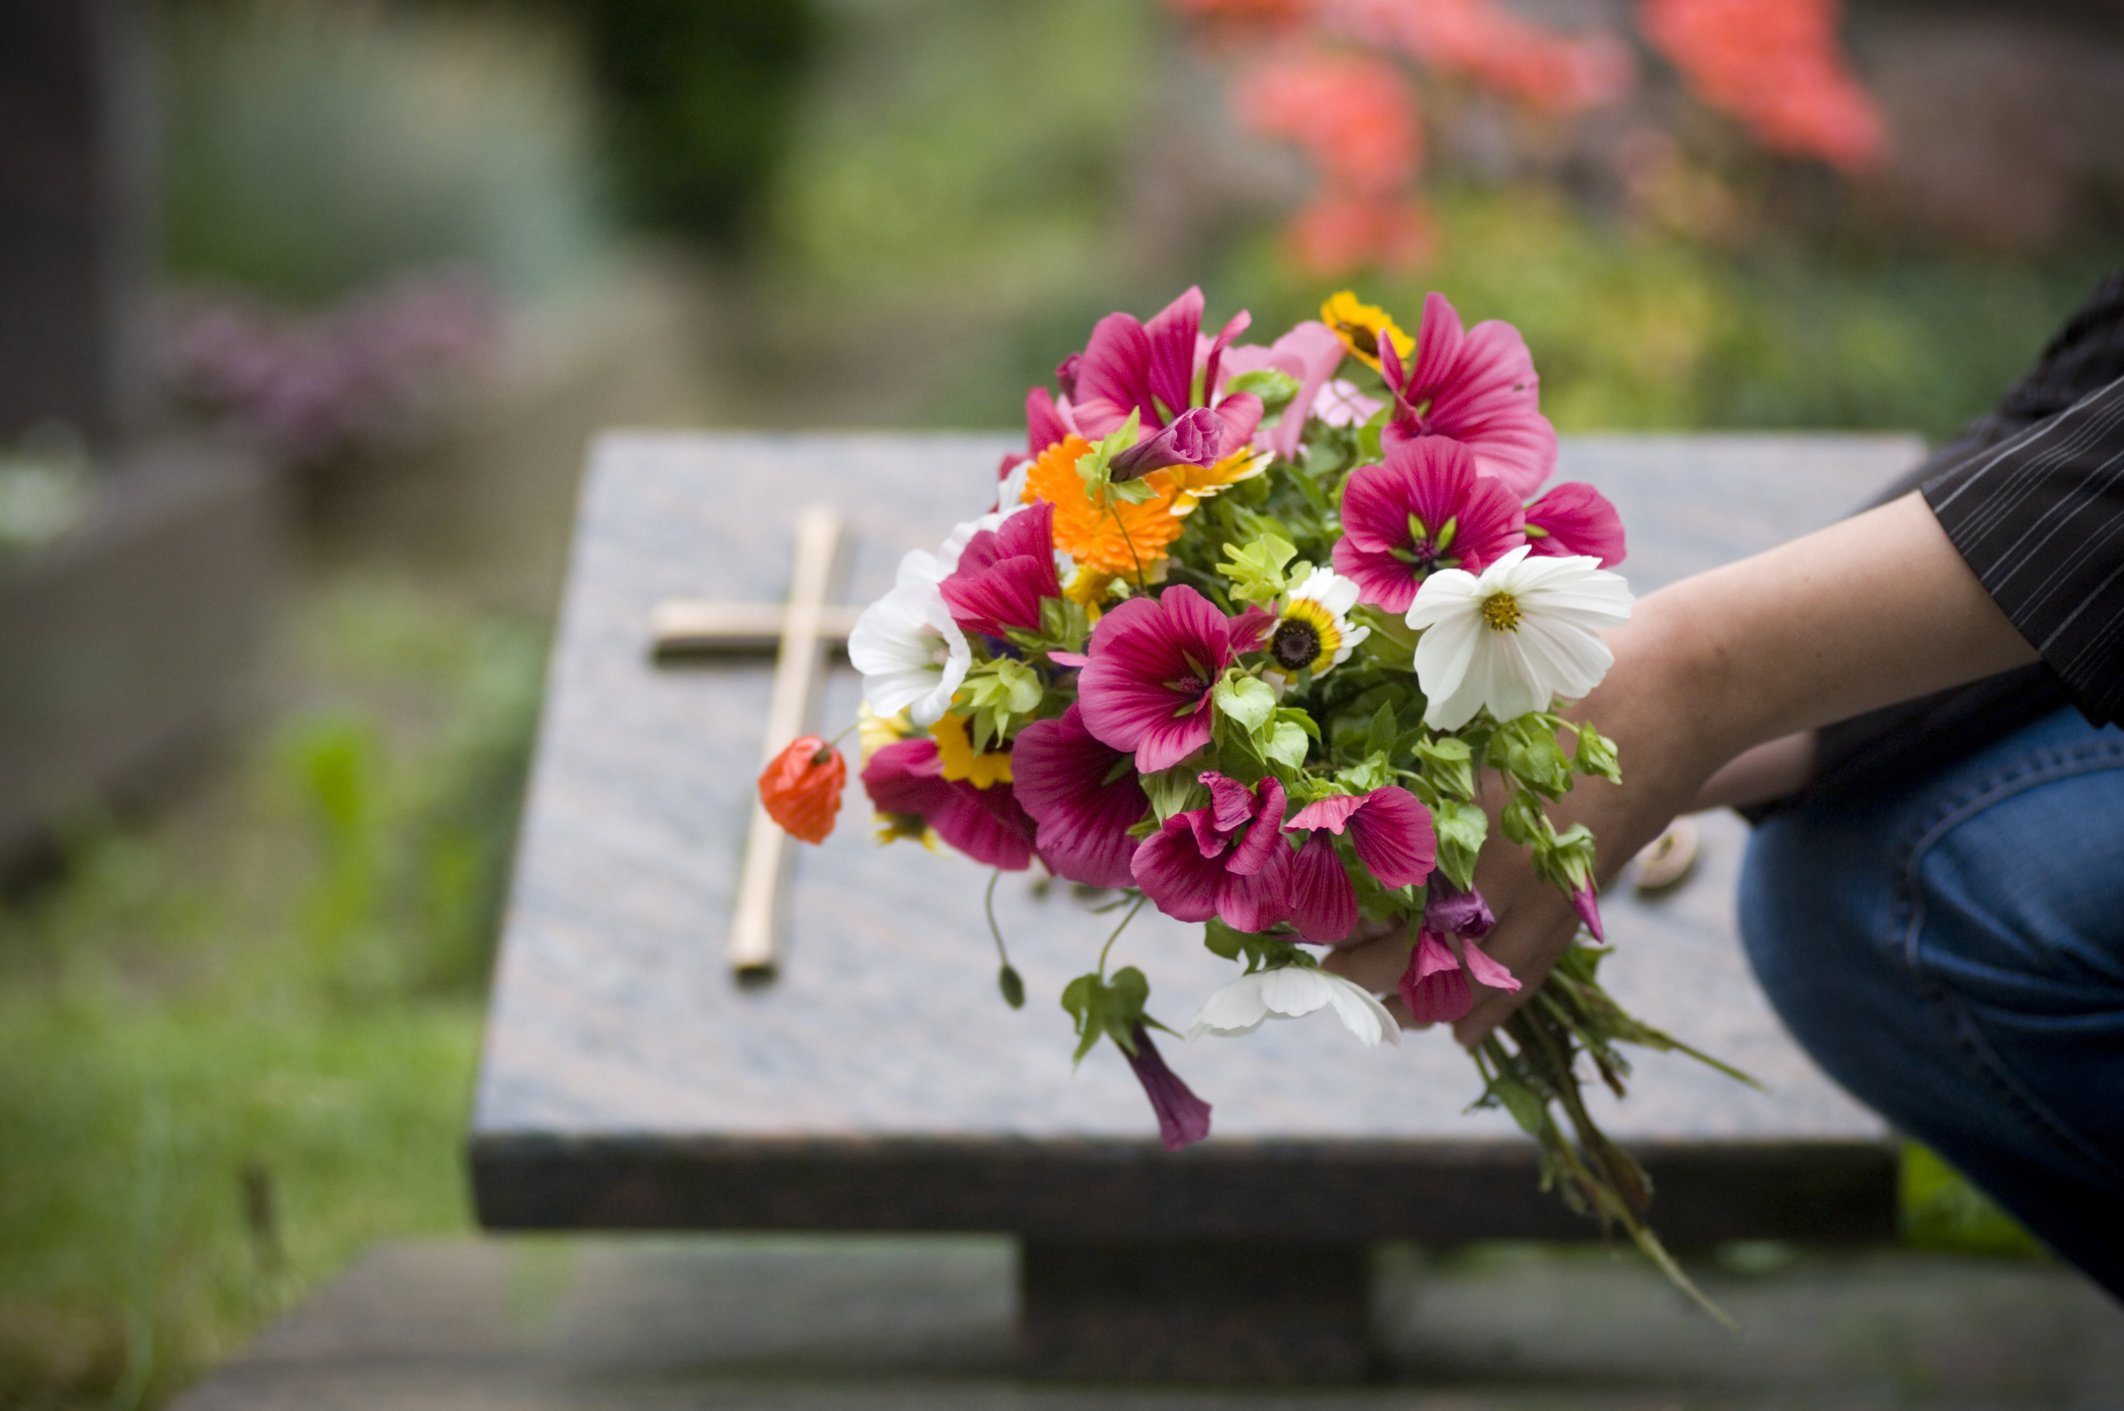 Mercy kept her sister in her heart and would often visit her grave with flowers despite everything that transpired between them | Source: Pexels